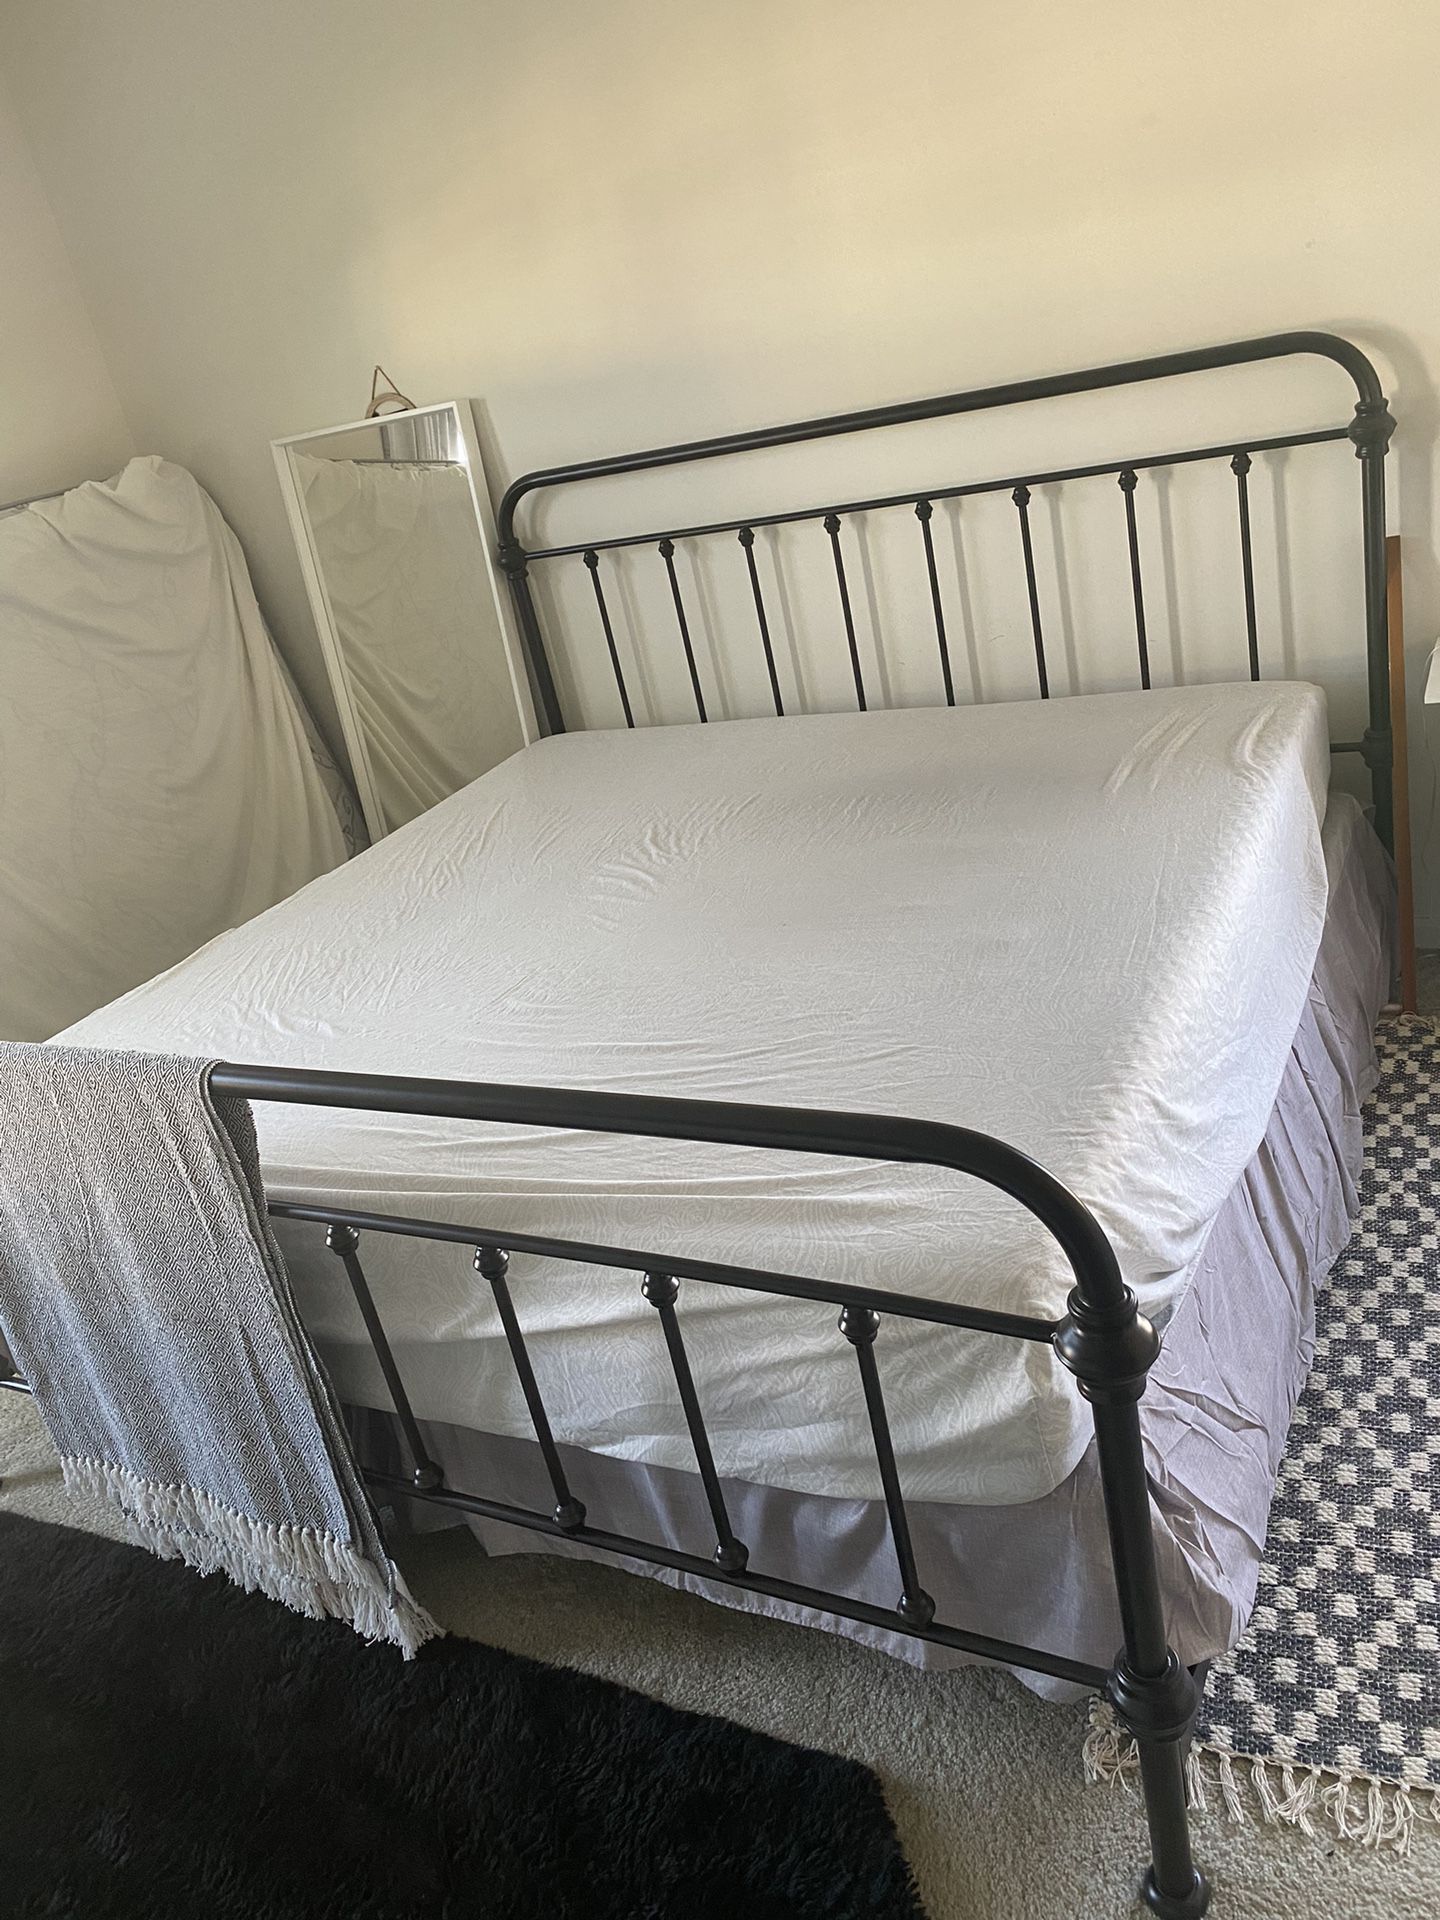 King bed $300